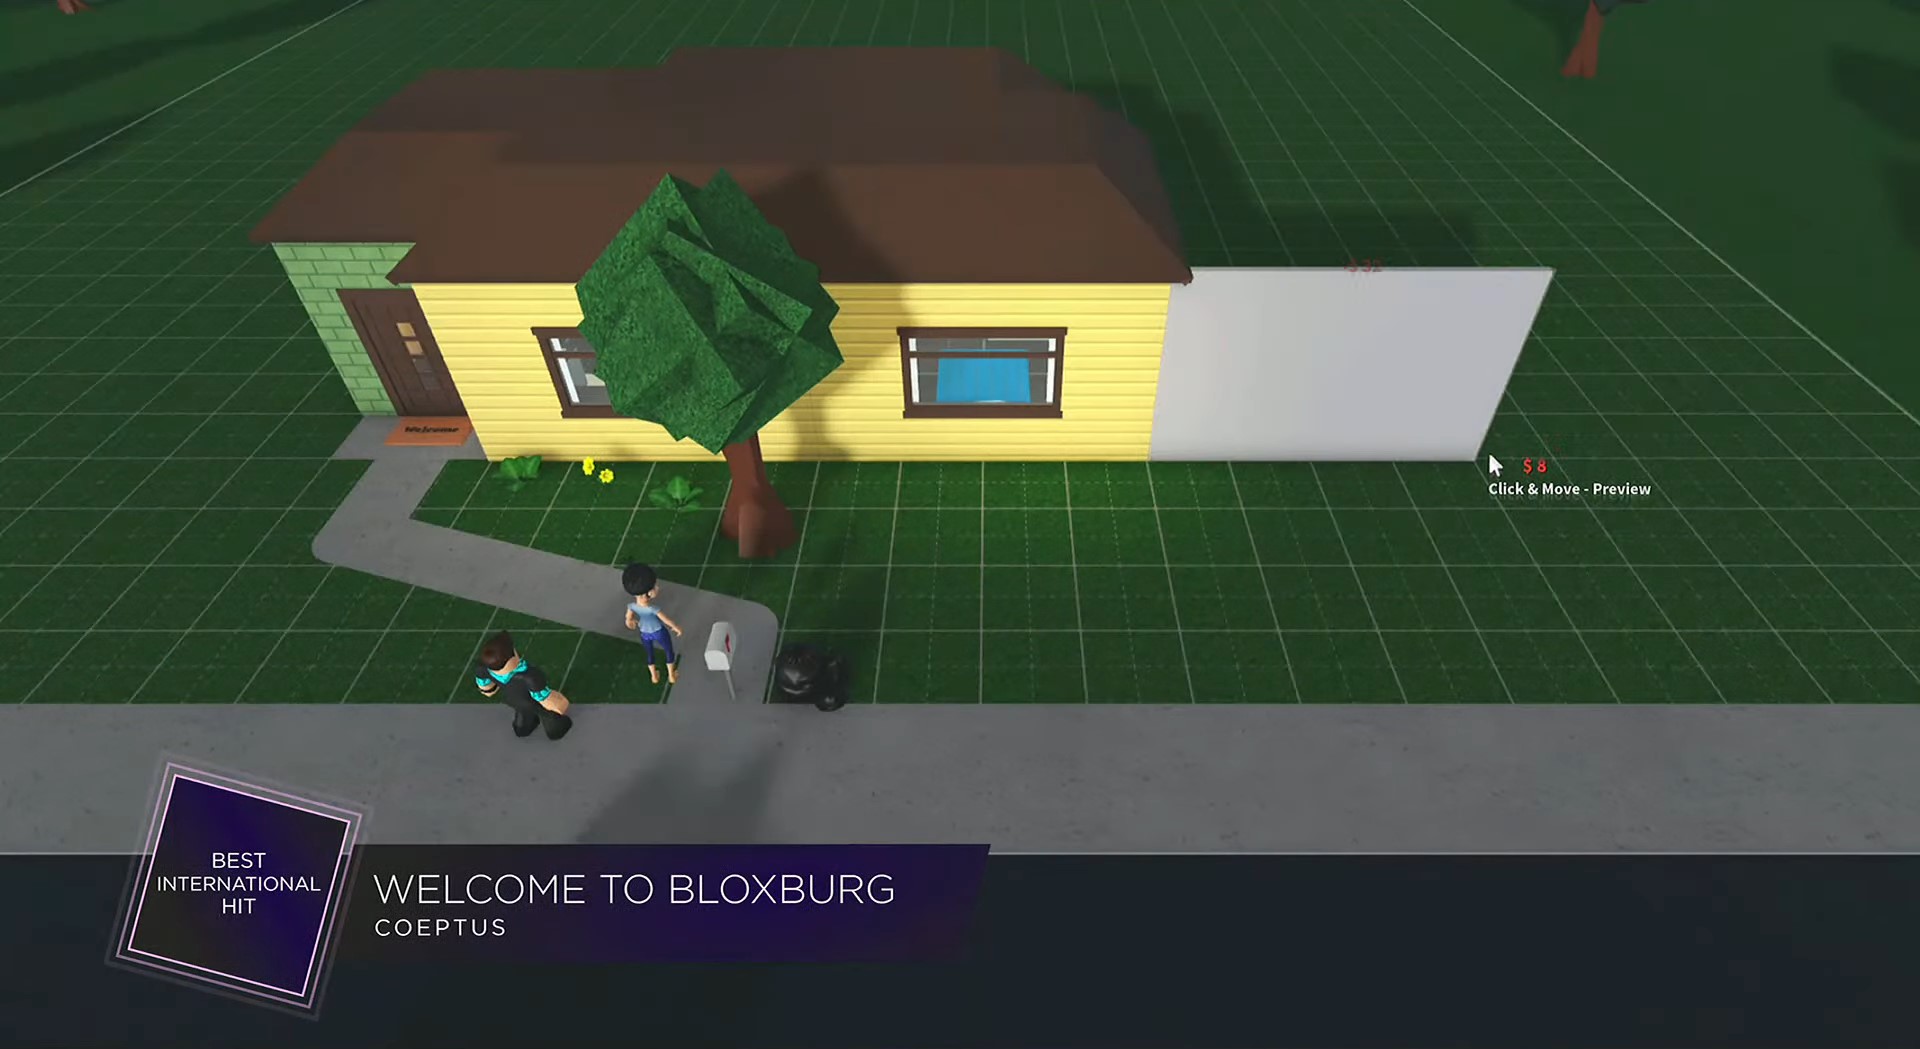 Roblox Innovation Awards 2022 celebrates best creations and games on  platform - Niche Gamer